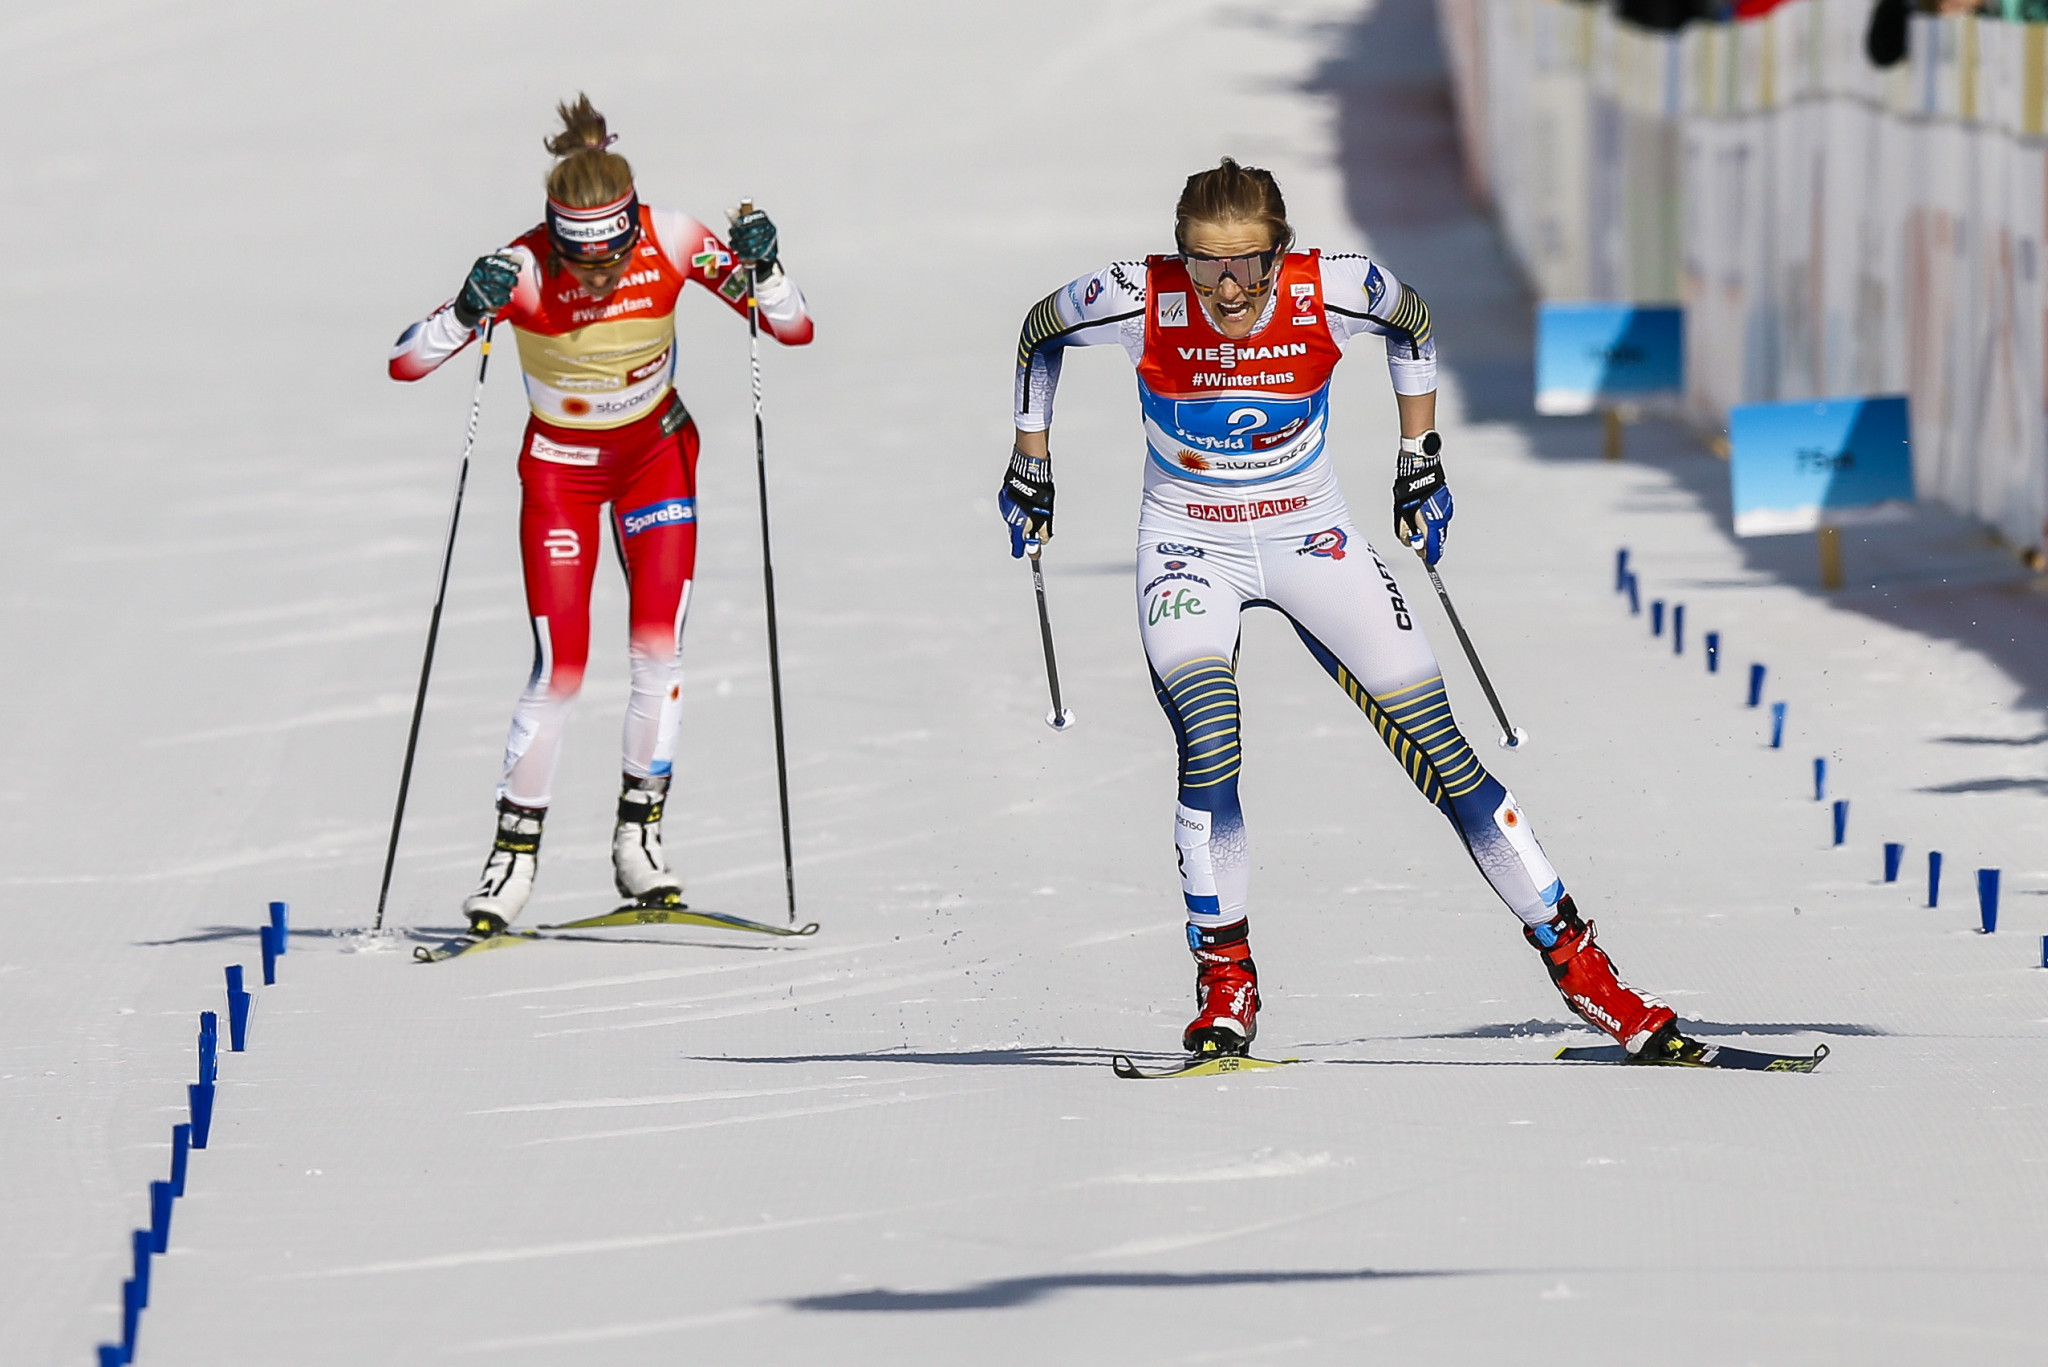 Stina Nilsson outfought Therese Johaug to win cross-country relay gold for Sweden ©Getty Images